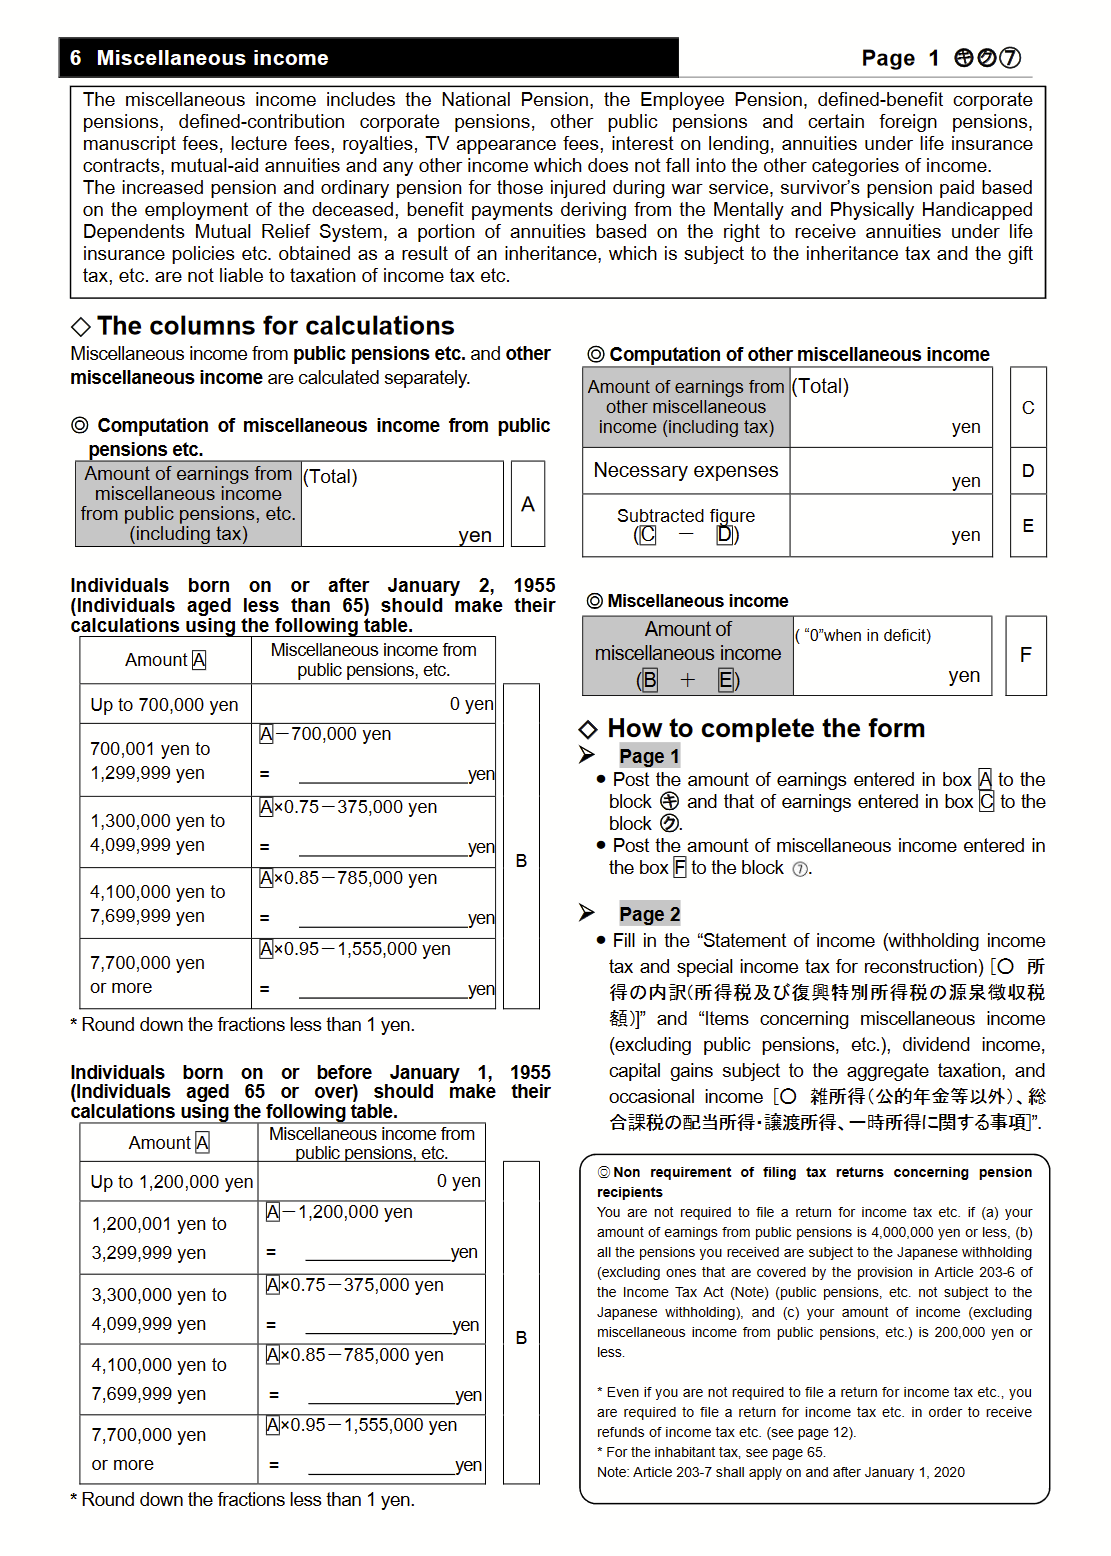 Japanese miscellaneous income reporting instructions